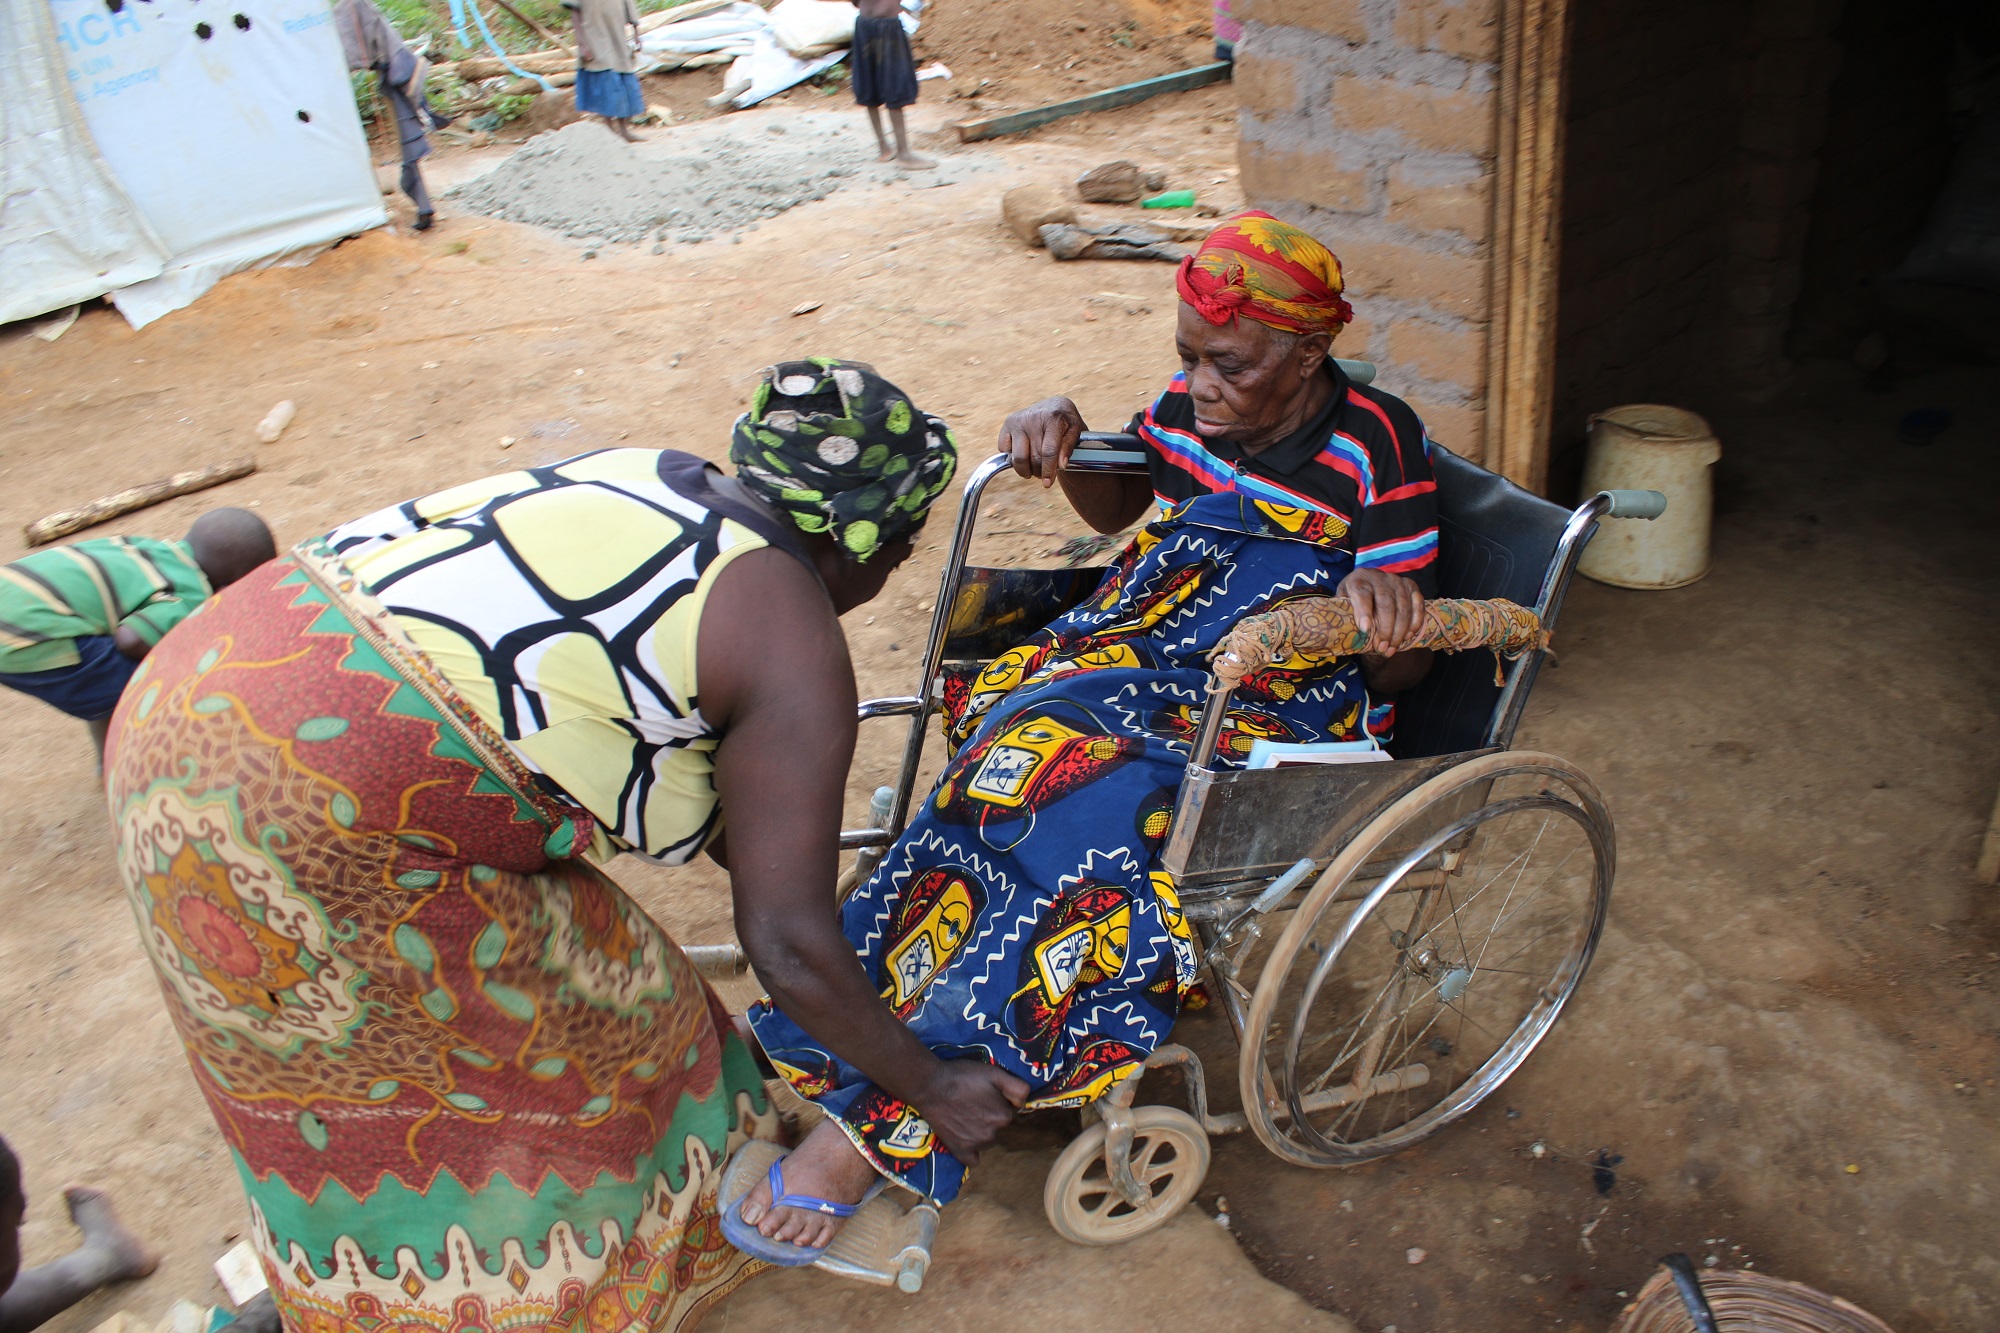  _838_https://www.helpage.org/silo/images/woman-on-a-wheelchair-in-tanzania-refugee-camp_2000x1333.jpg